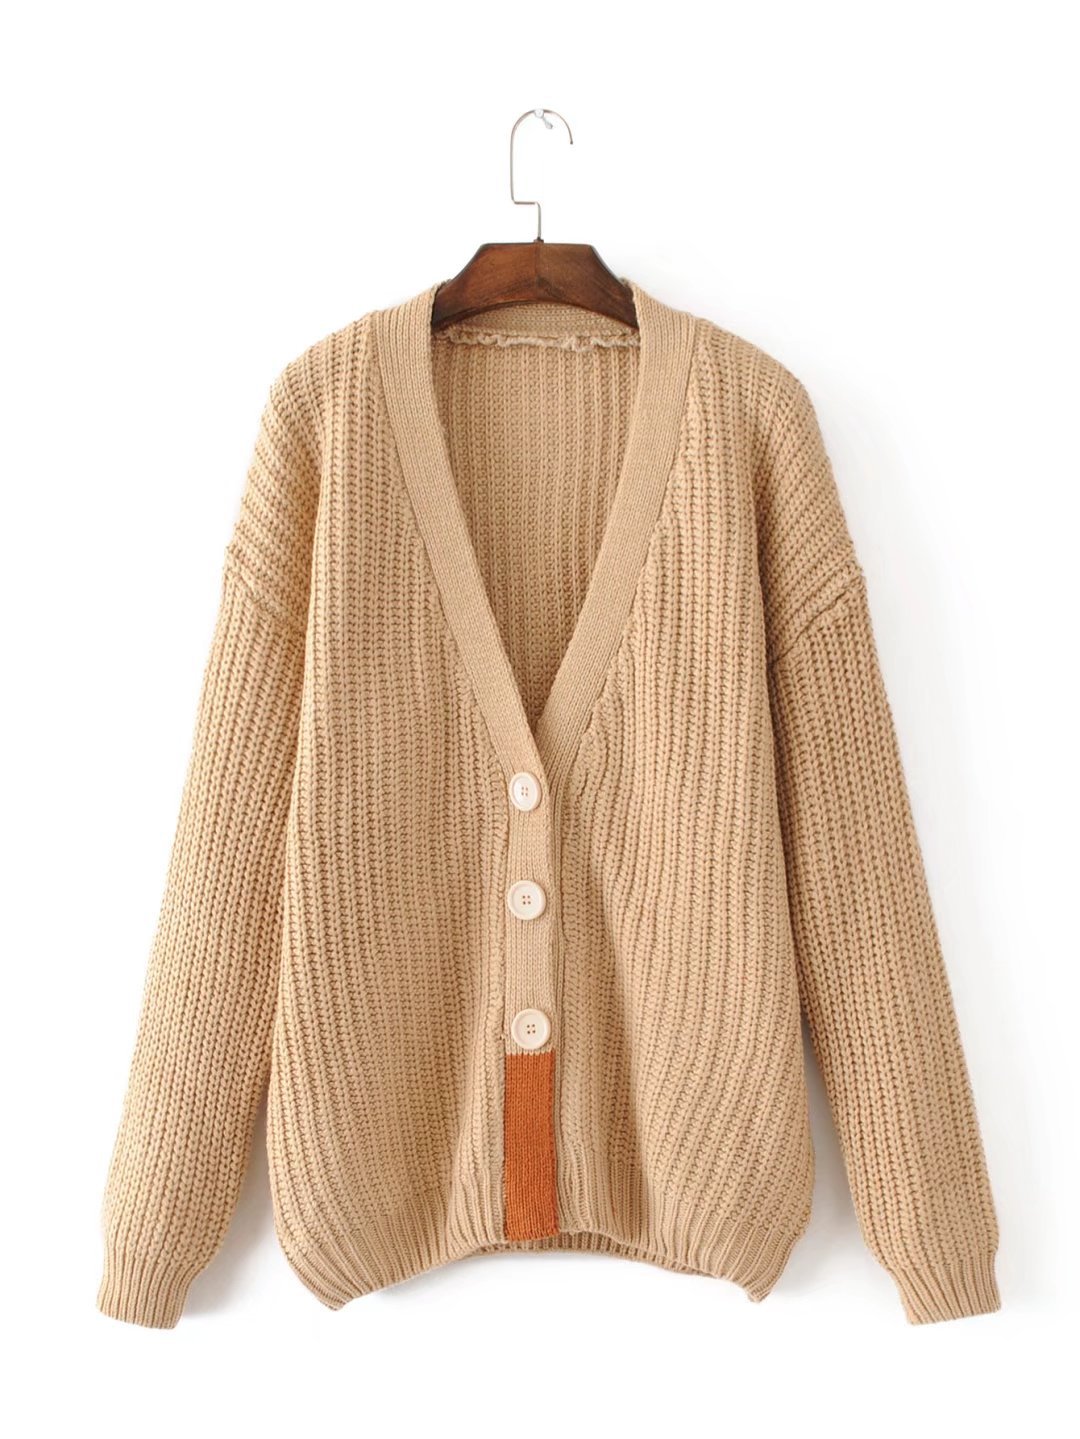 Women Fashion All-match Single Breasted Loose Cardigan Sweater Coat